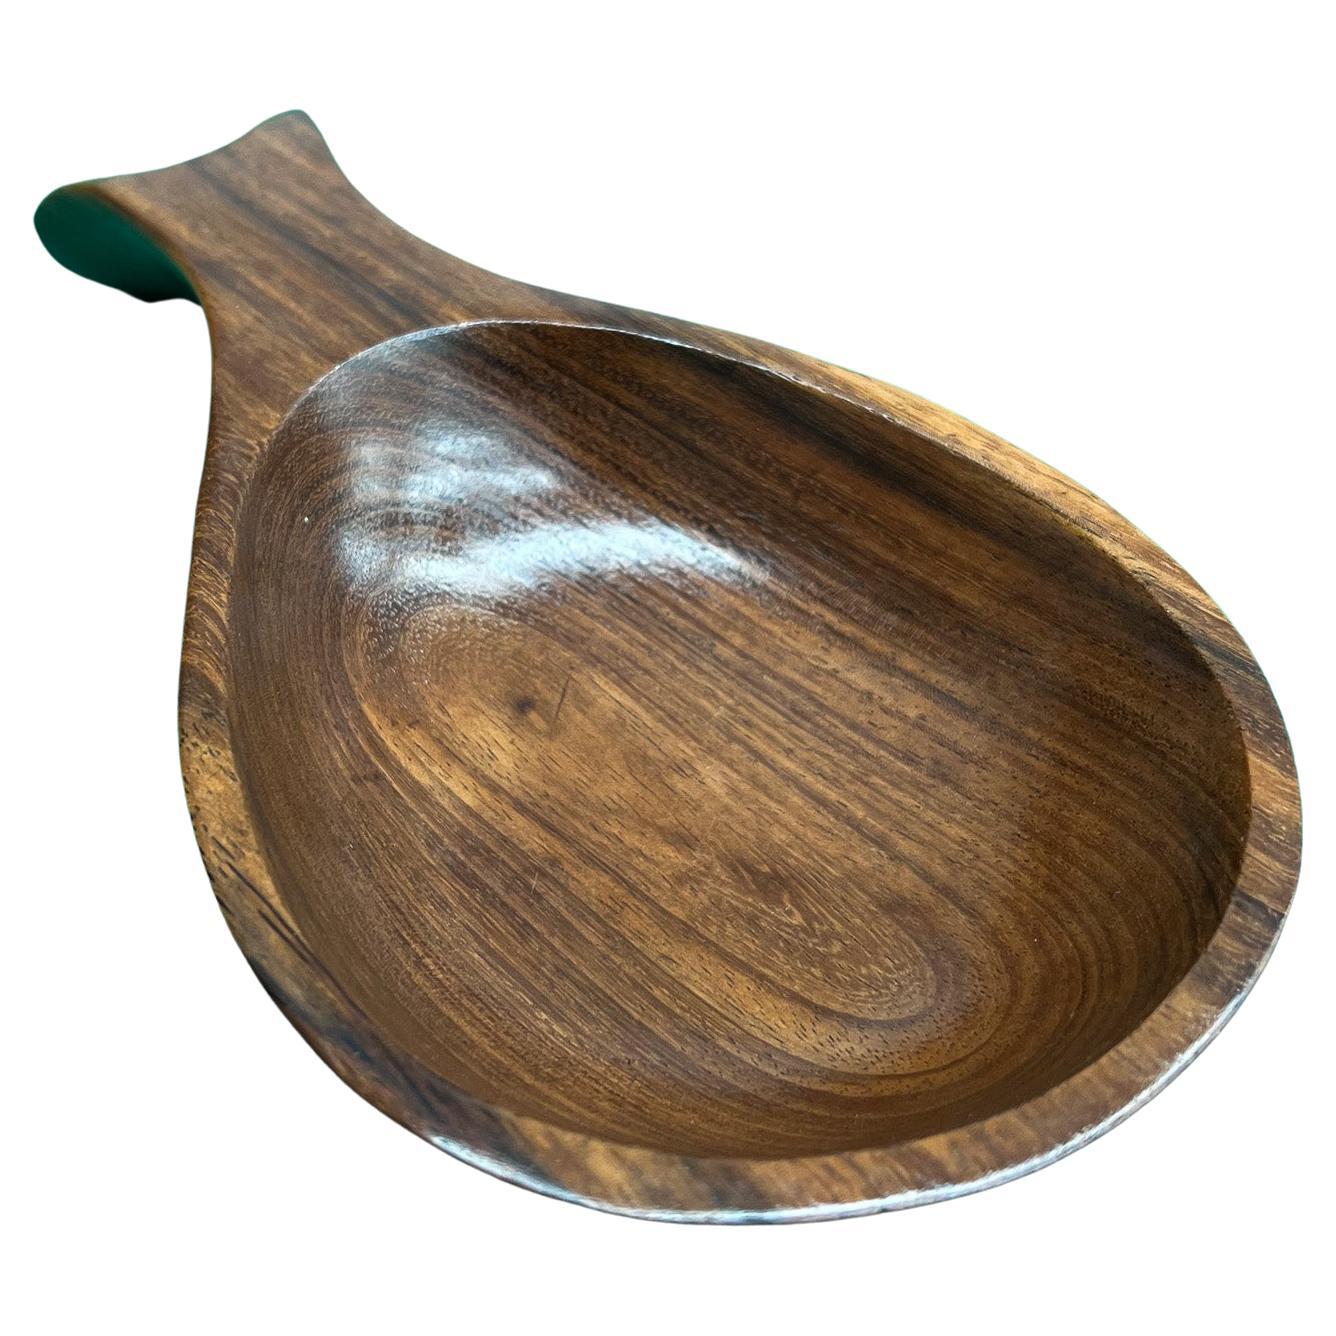 Decorative Bowl in Brazilian Hardwood, Unknown, 1960s For Sale